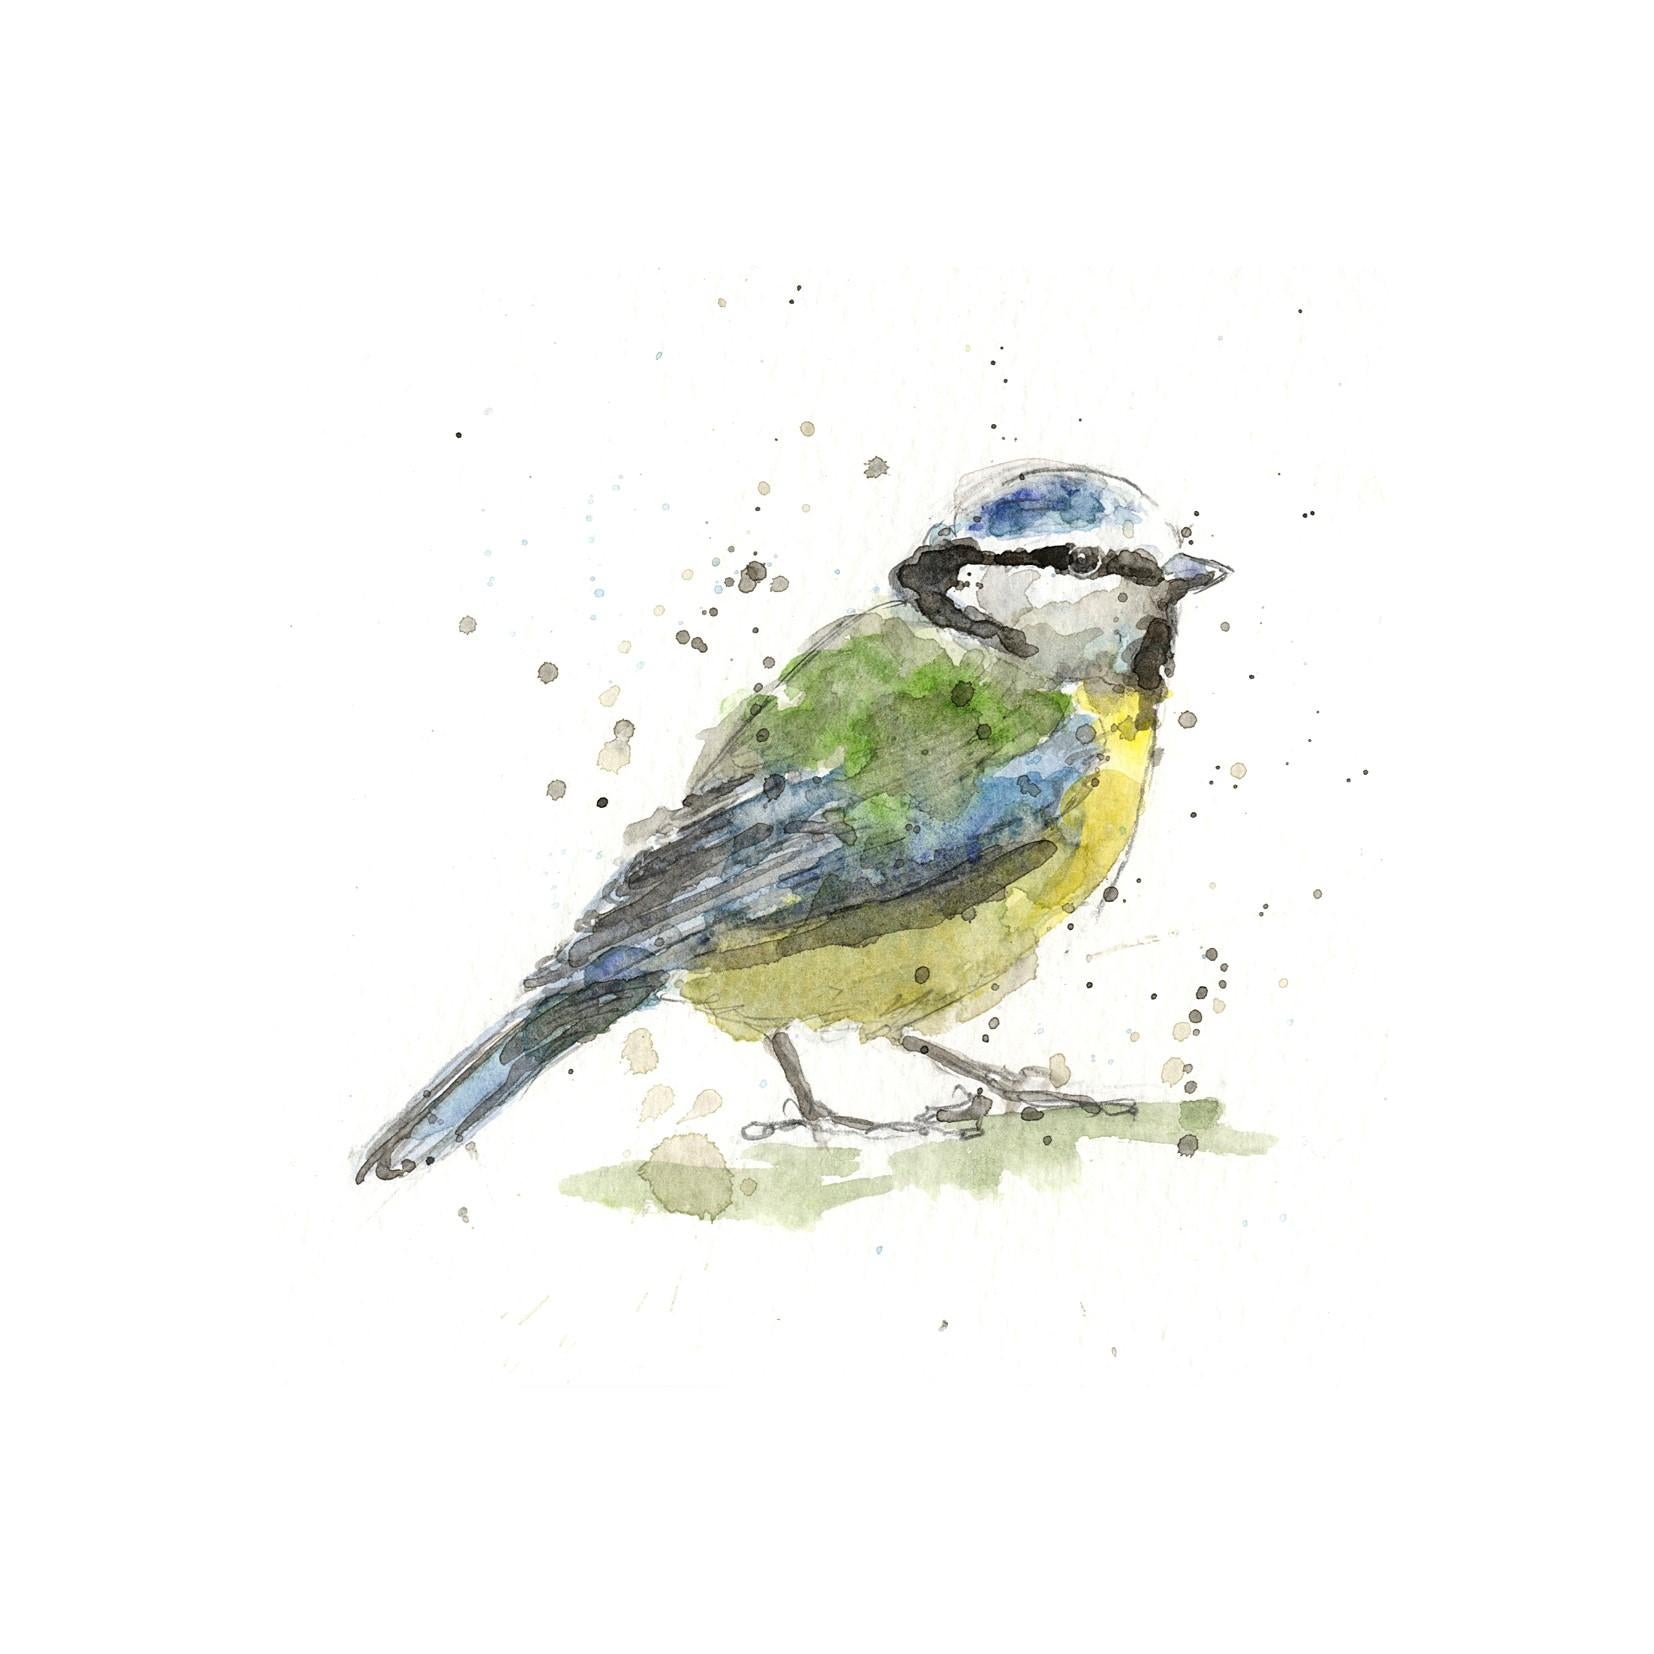 Blue Tit and Great Tit Diptych - Print by Zaza Shelley